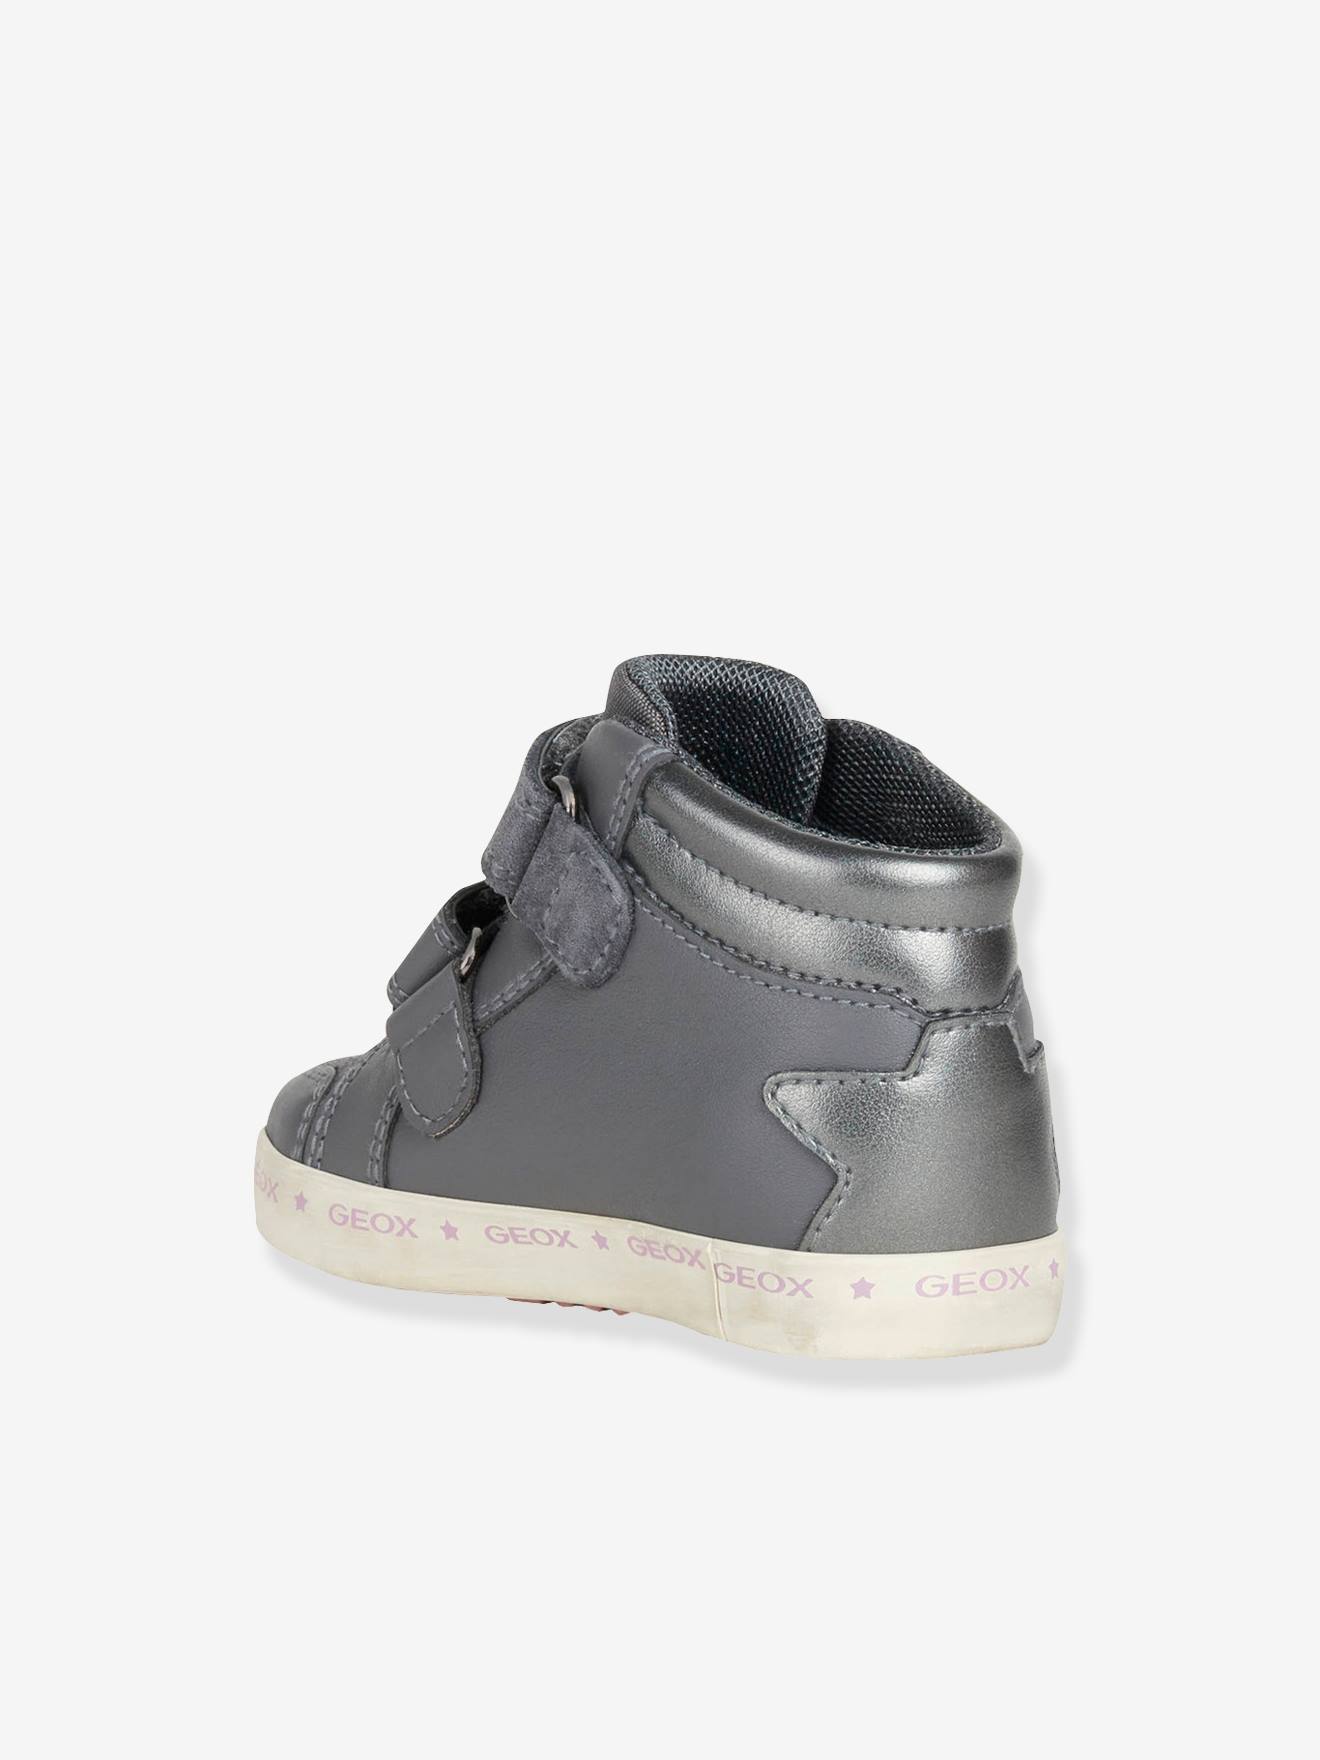 Peculiar Contour Petulance Trainers for Baby Girls, Kilwi Girl B by GEOX® - dark grey, Shoes